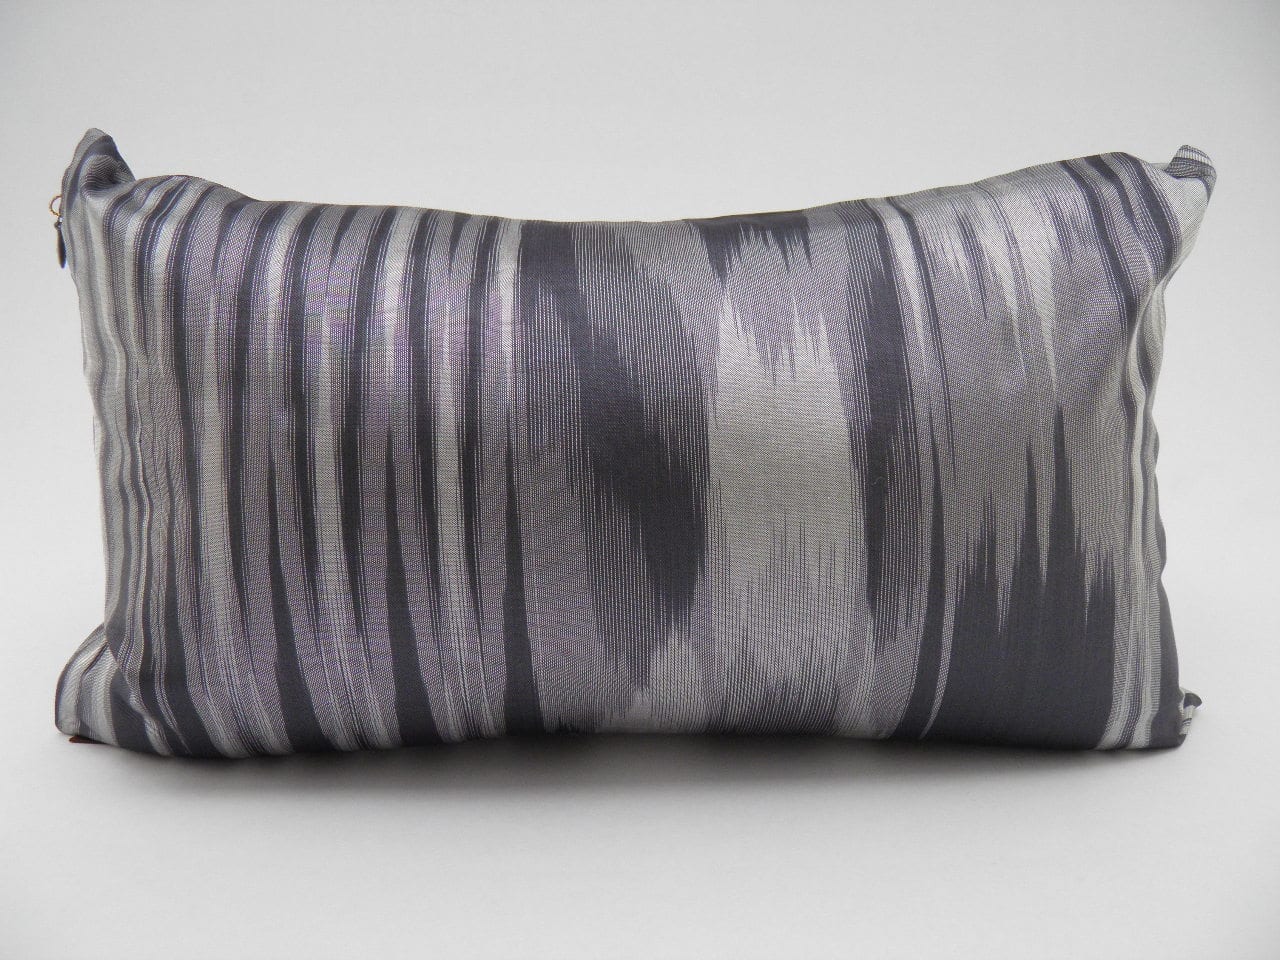 IKAT Cushion Cover - Charcoal / Silver - 45x27cm